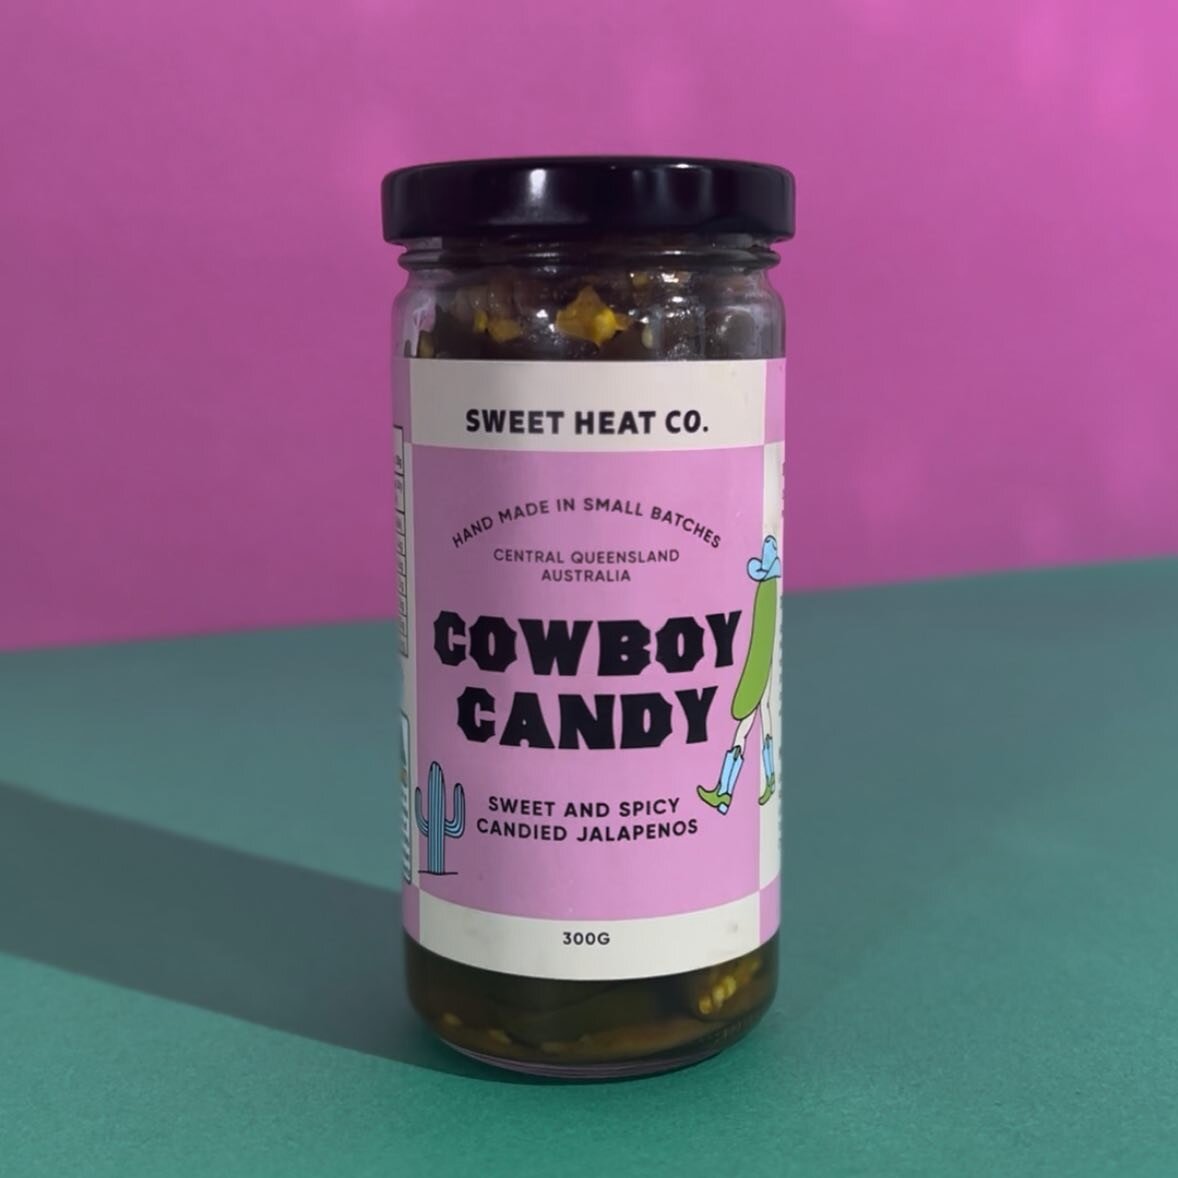 She&rsquo;s finally here!! Cowboy Candy is now available to order online 😋🪩💚

Sweet, spicy, garlicky and delicious! Grab yourself a jar of Cowboy Candy to spice up your life &amp; your cheese board 🧀💚🌶️